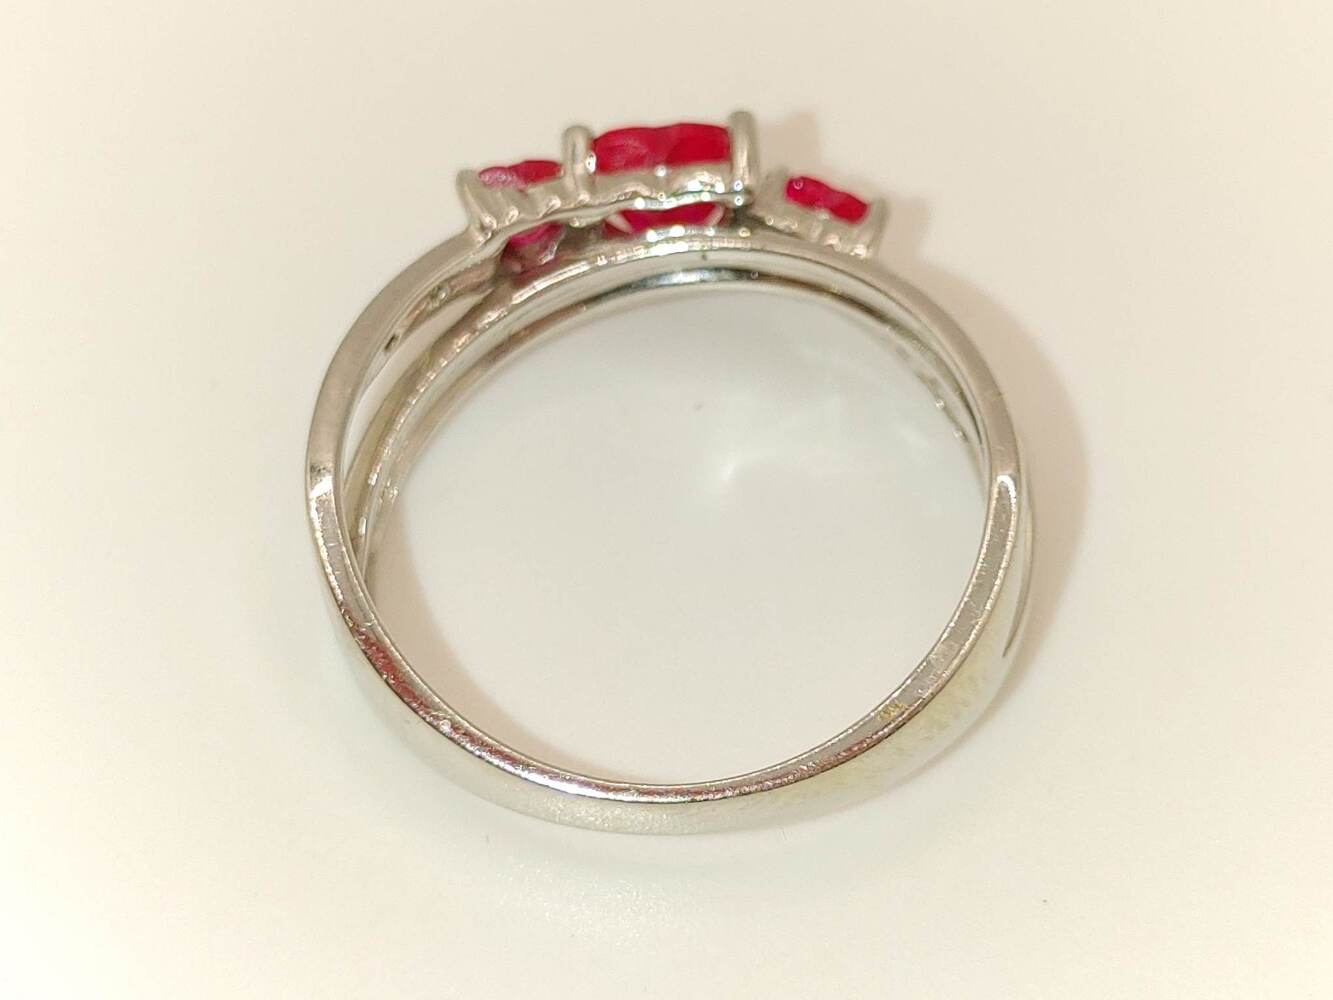 Lady's 10 Karat White Gold Ring with Deep Pink Heart Stones